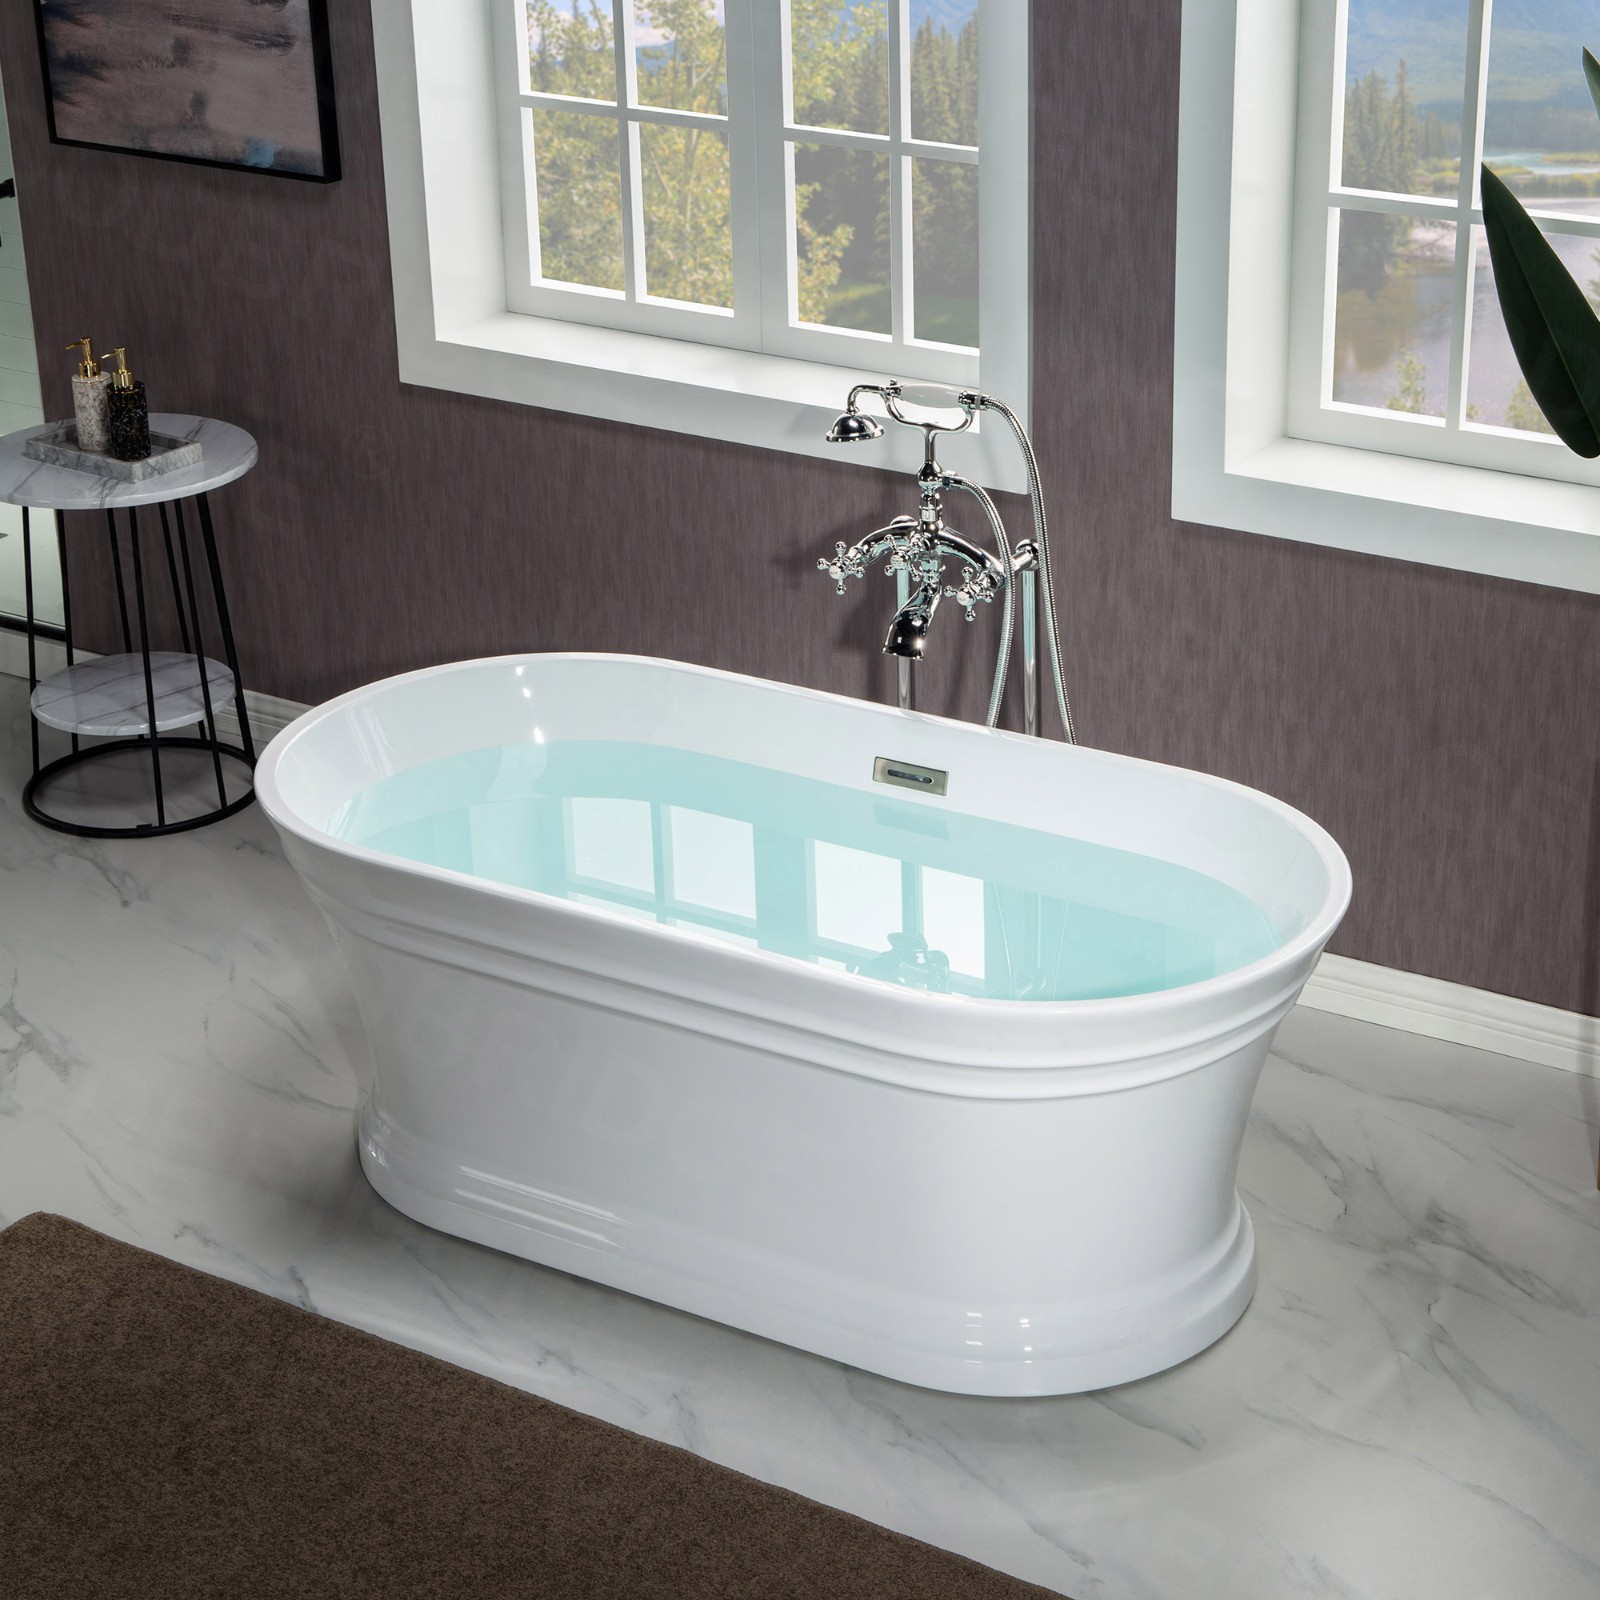  WOODBRIDGE 59 in. Freestanding Double Ended Acrylic Soaking Bathtub with Center Drain Assembly and Overflow, BTA1536/B1536, Glossy White_7856